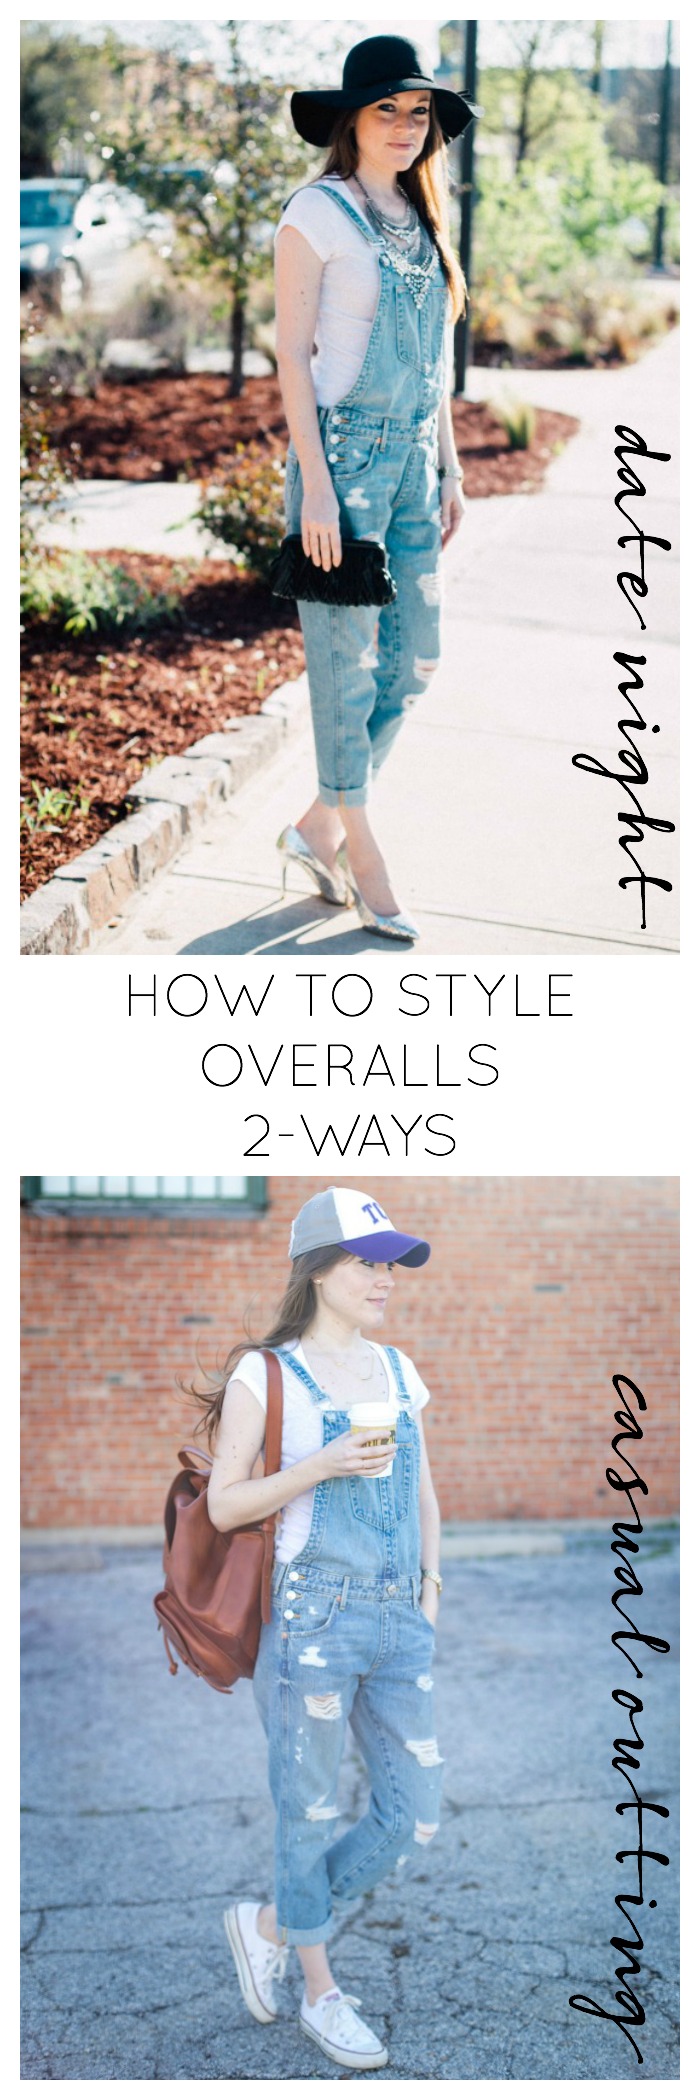 How-To Style Overalls 2 Ways